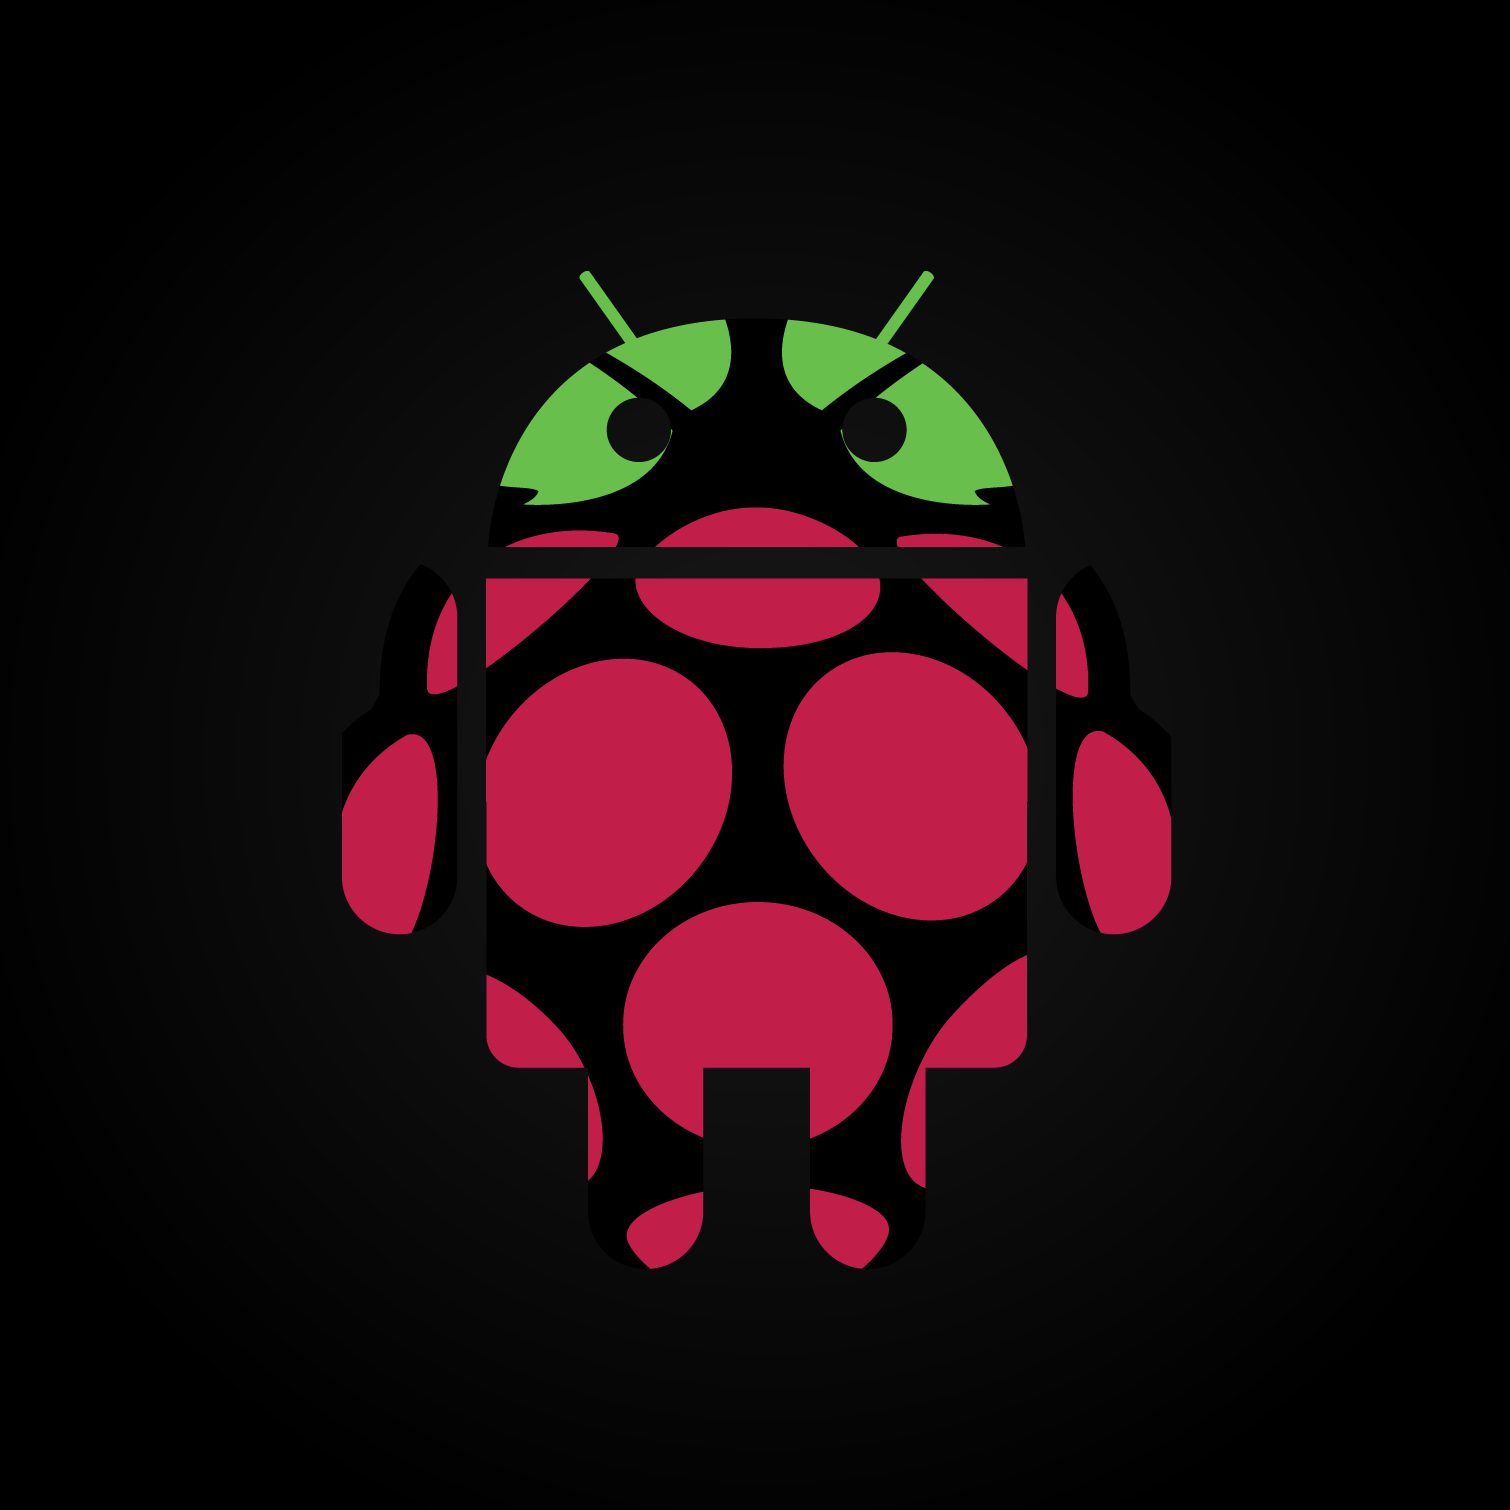 How To install Android On Raspberry pi 2 